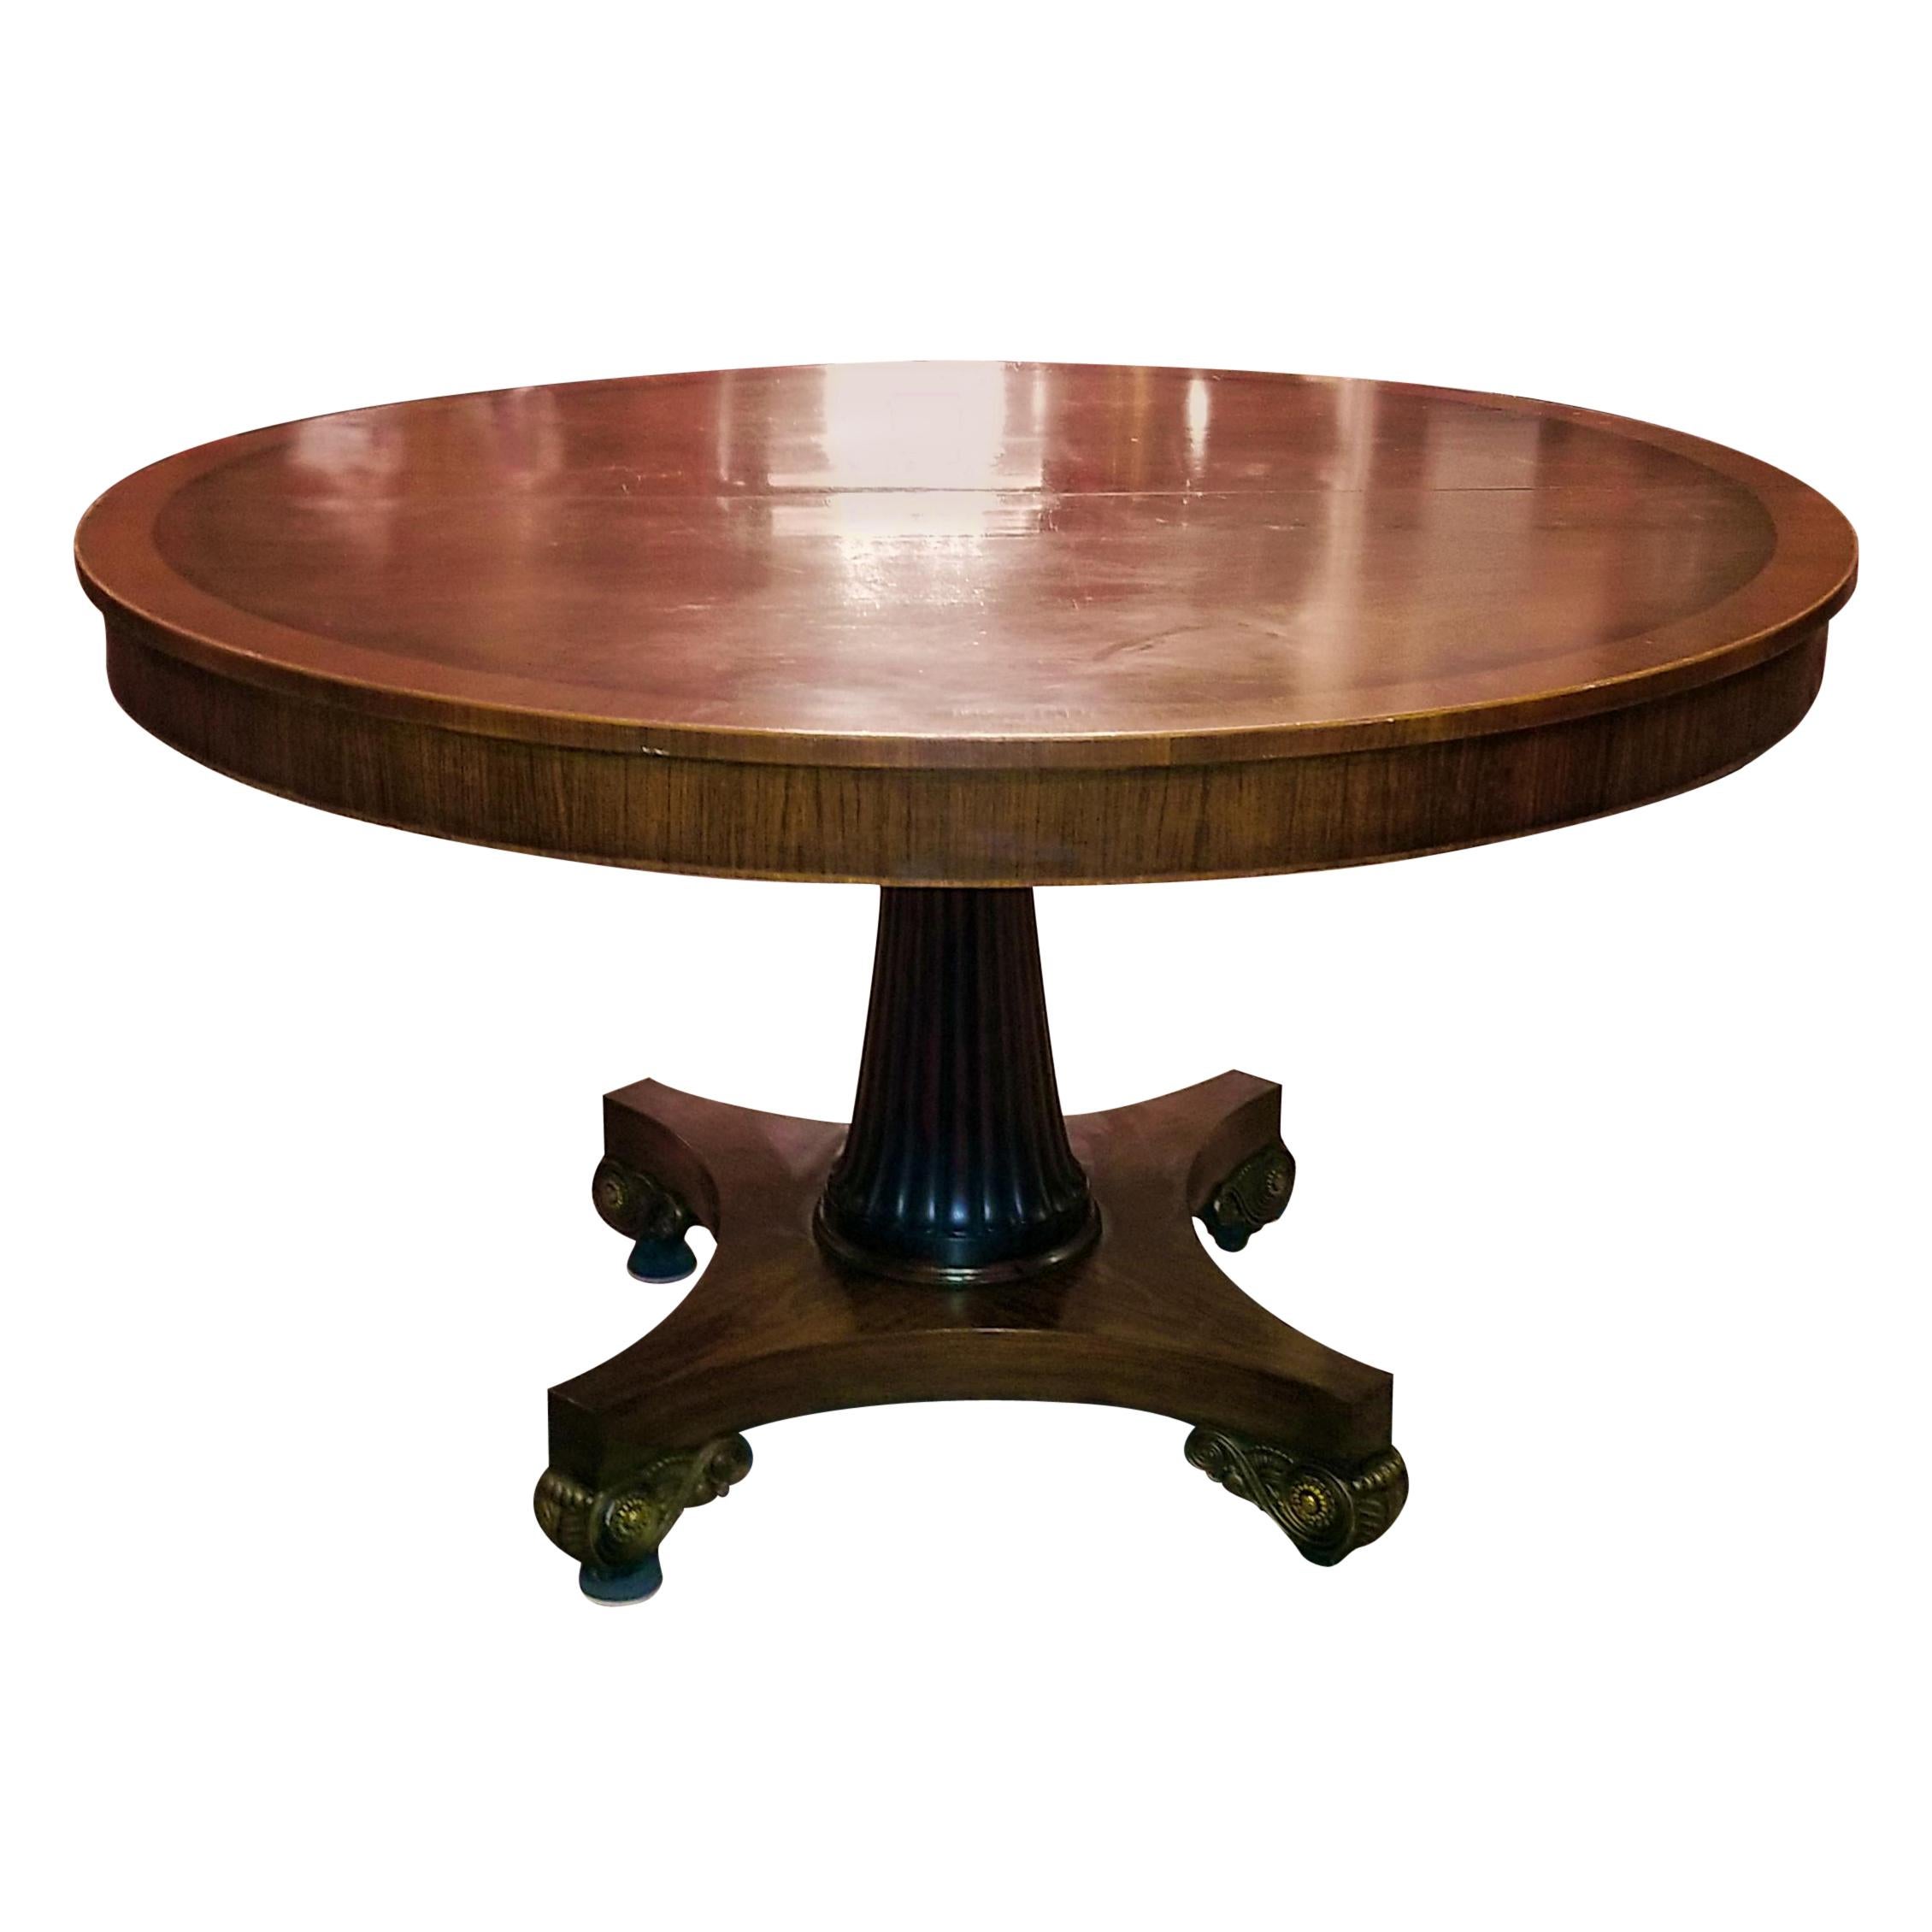 Late 19th Century American Mahogany Extendable Dining or Center Table